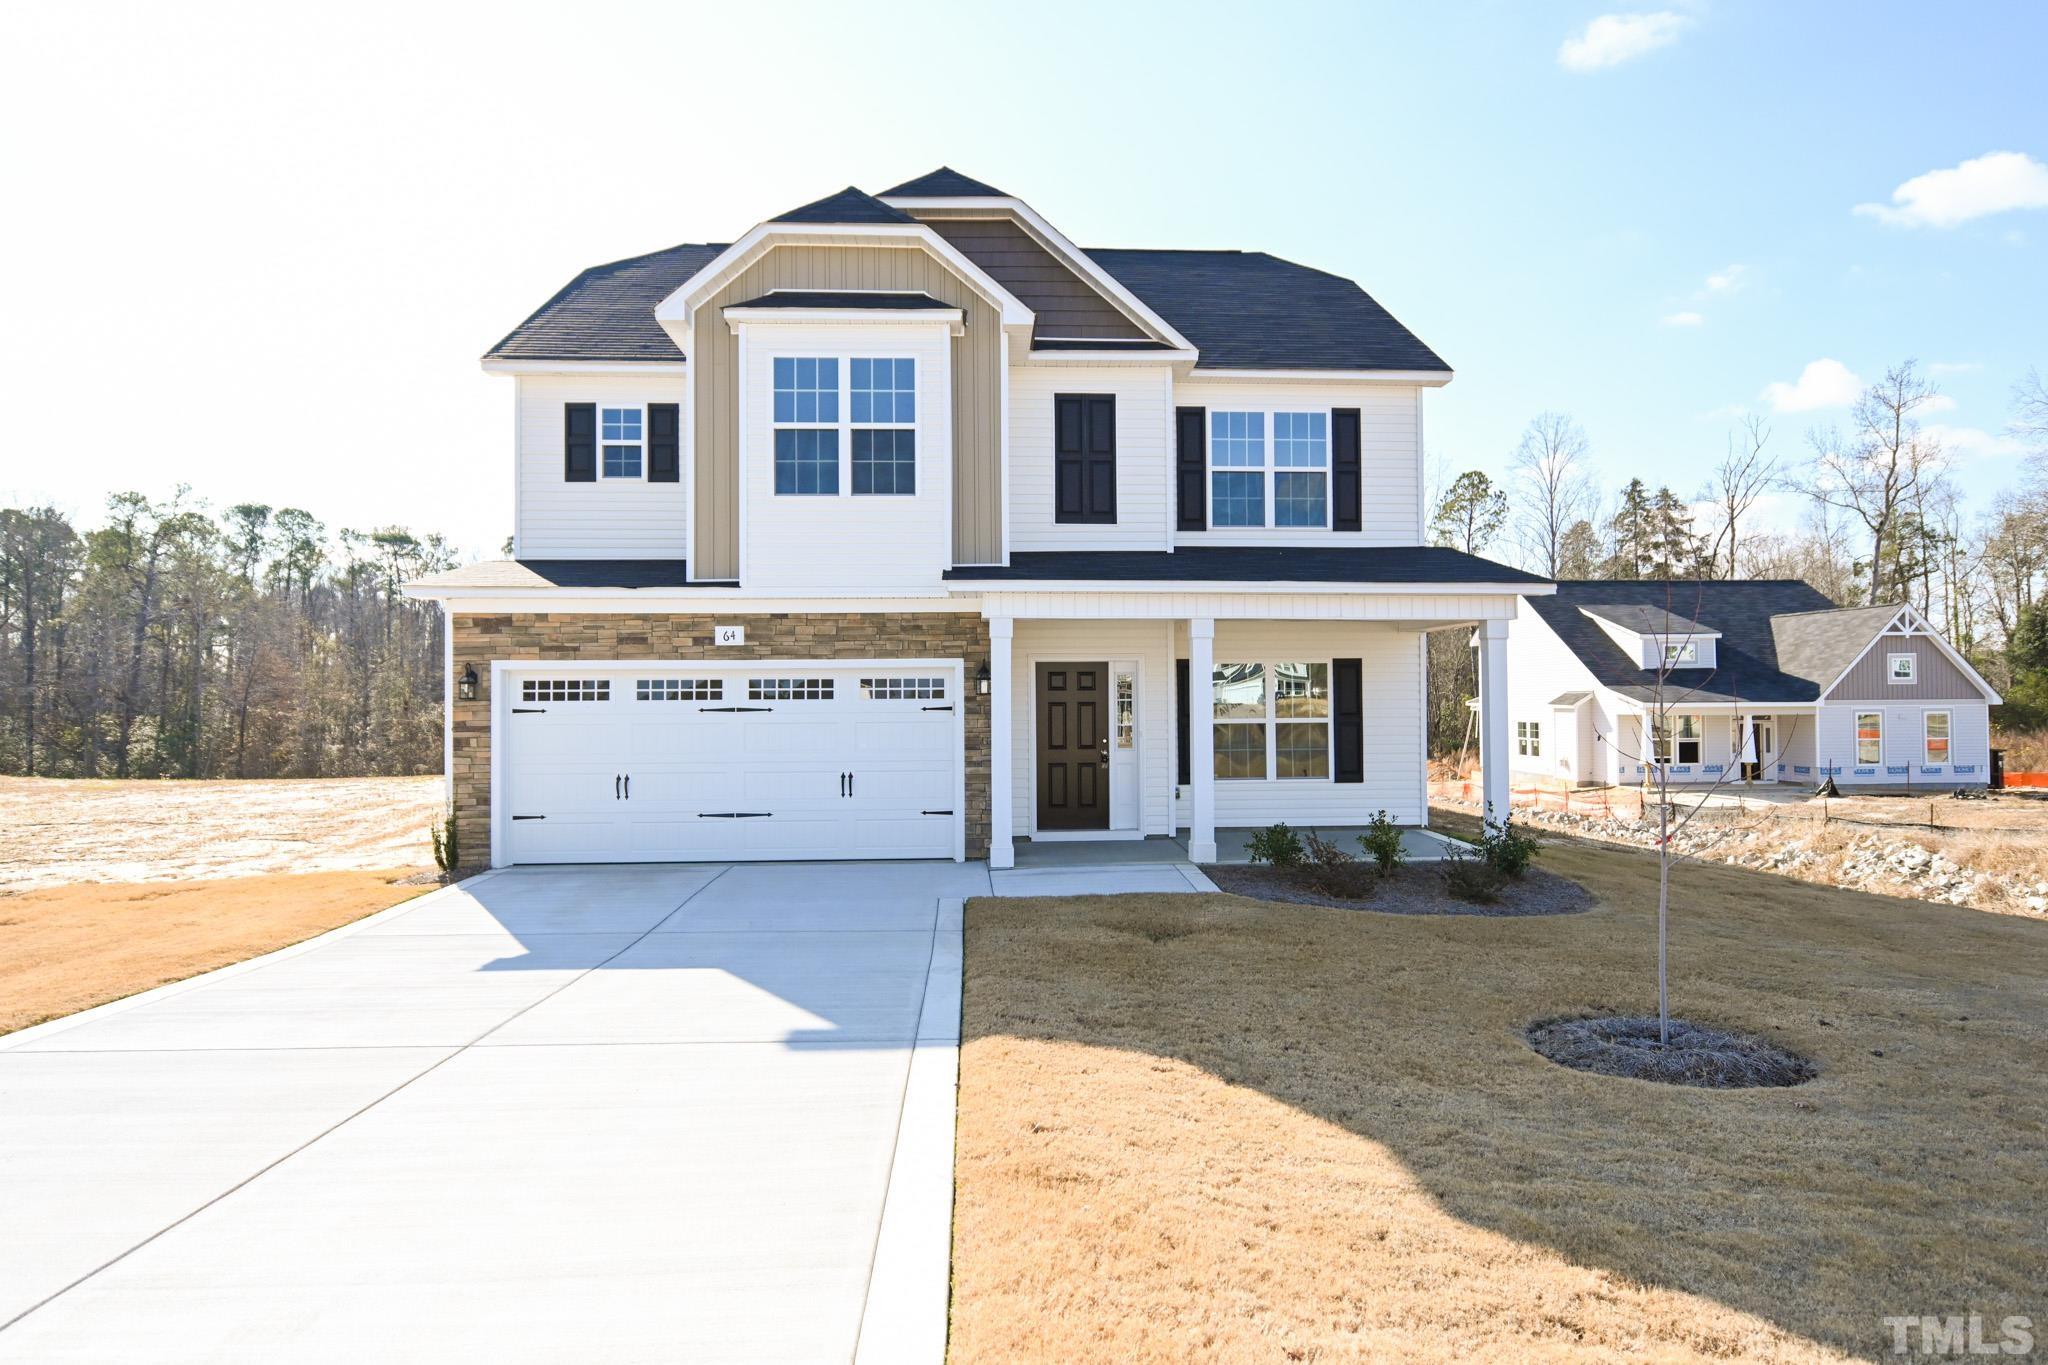 New home for sale in Williams Farm, Erwin NC